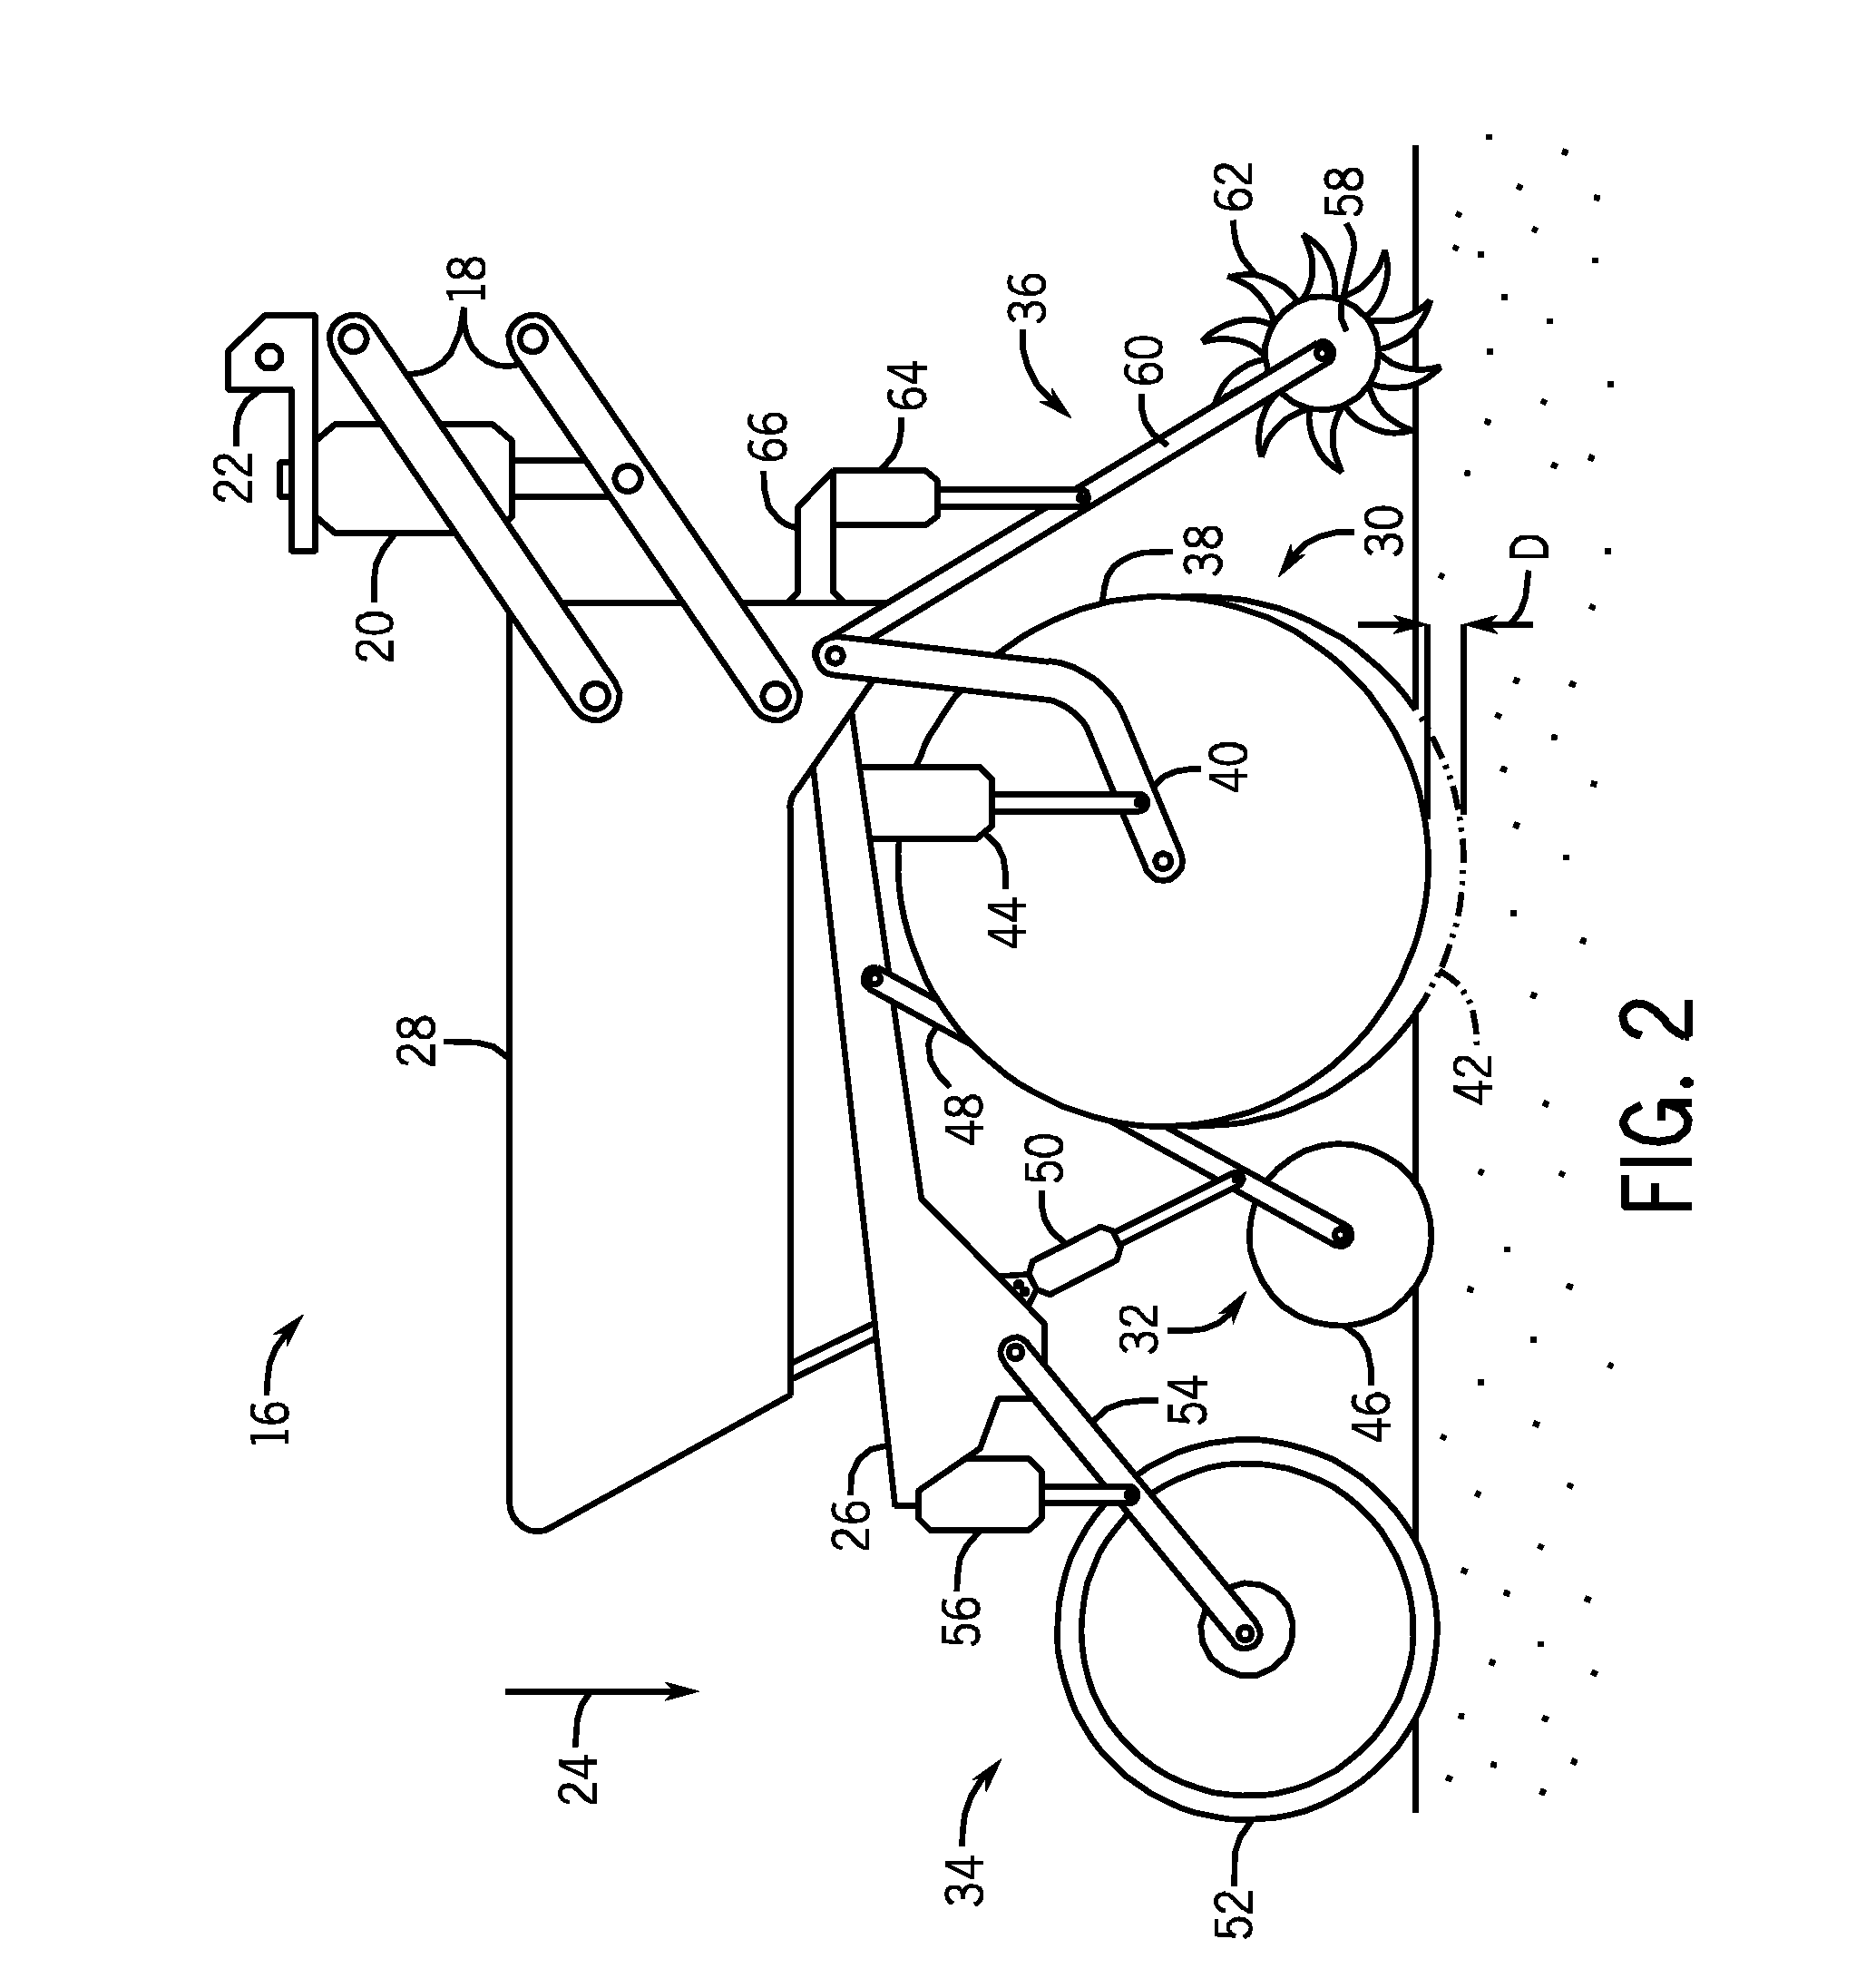 Manual backup system for controlling fluid flow to cylinders within an agricultural implement